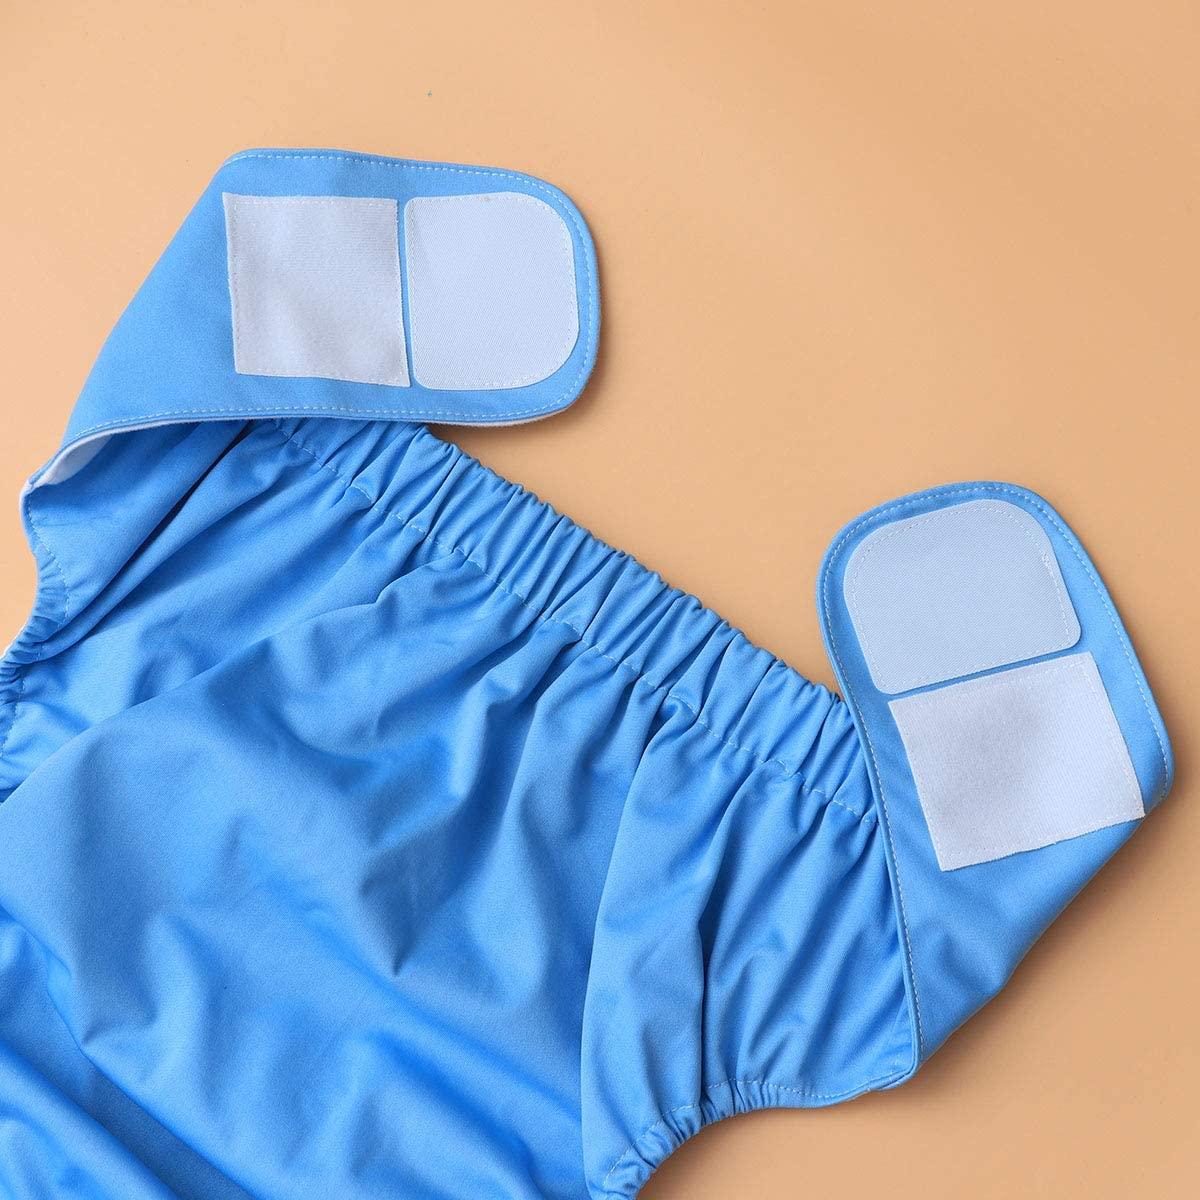 2pcs Adult Diapers Covers Reusable Incontinence Pants Cloth Diaper Wraps  Washable Overnight Leakfree Underwear Protection Bed Sheet for Women Men  Bariatric Seniors Patients (Sky Blue) 